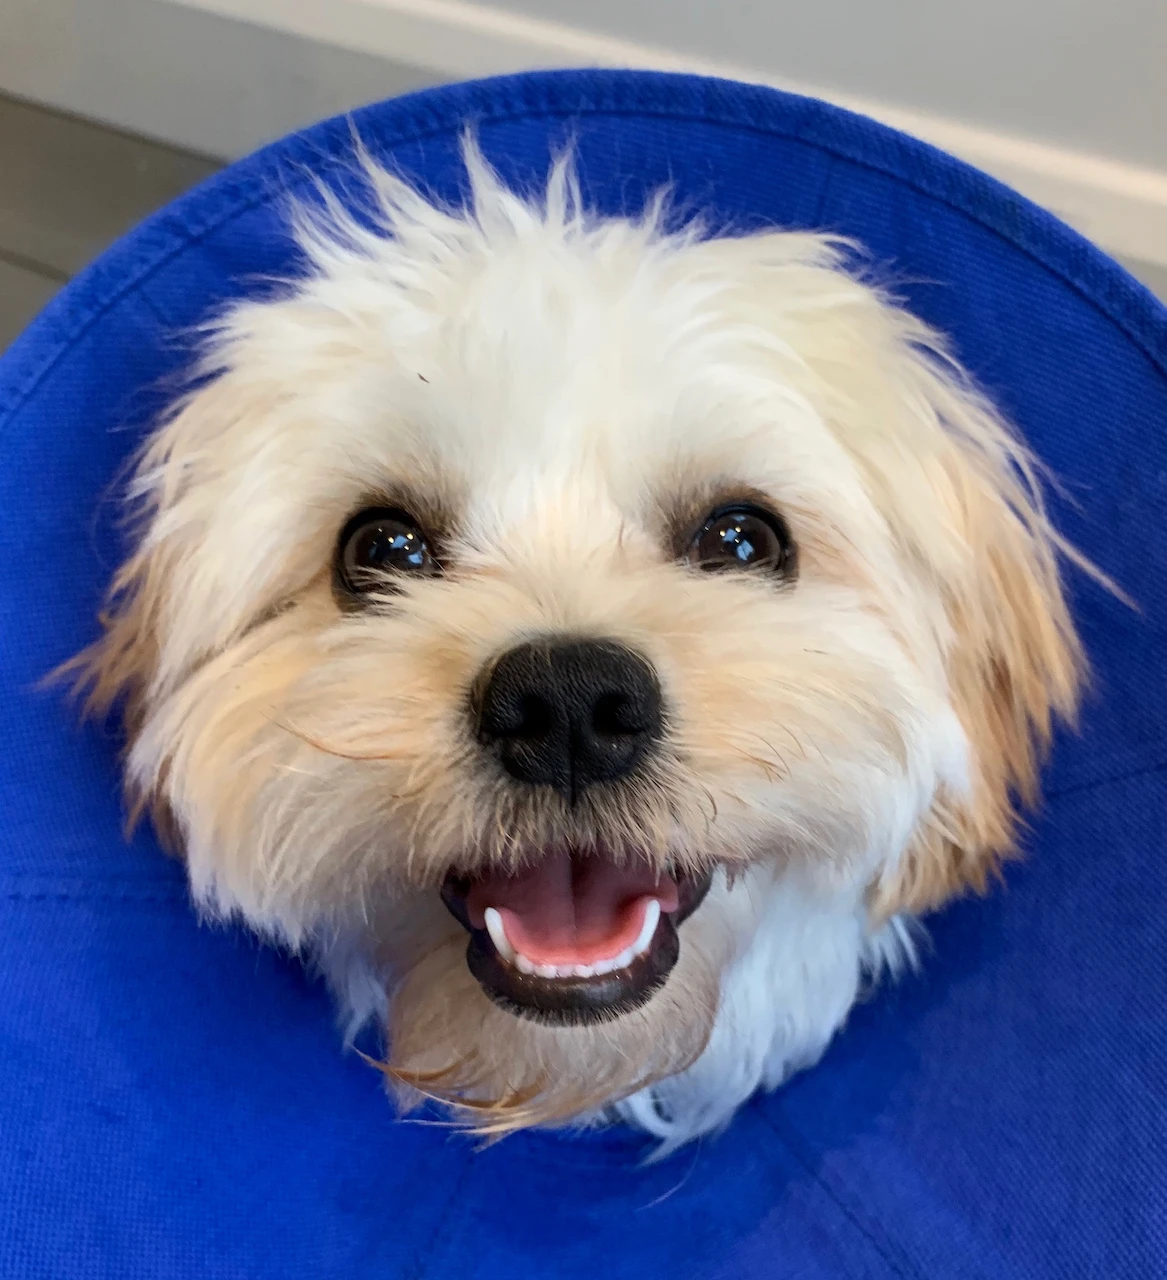 Cone of Shame, but Happy!